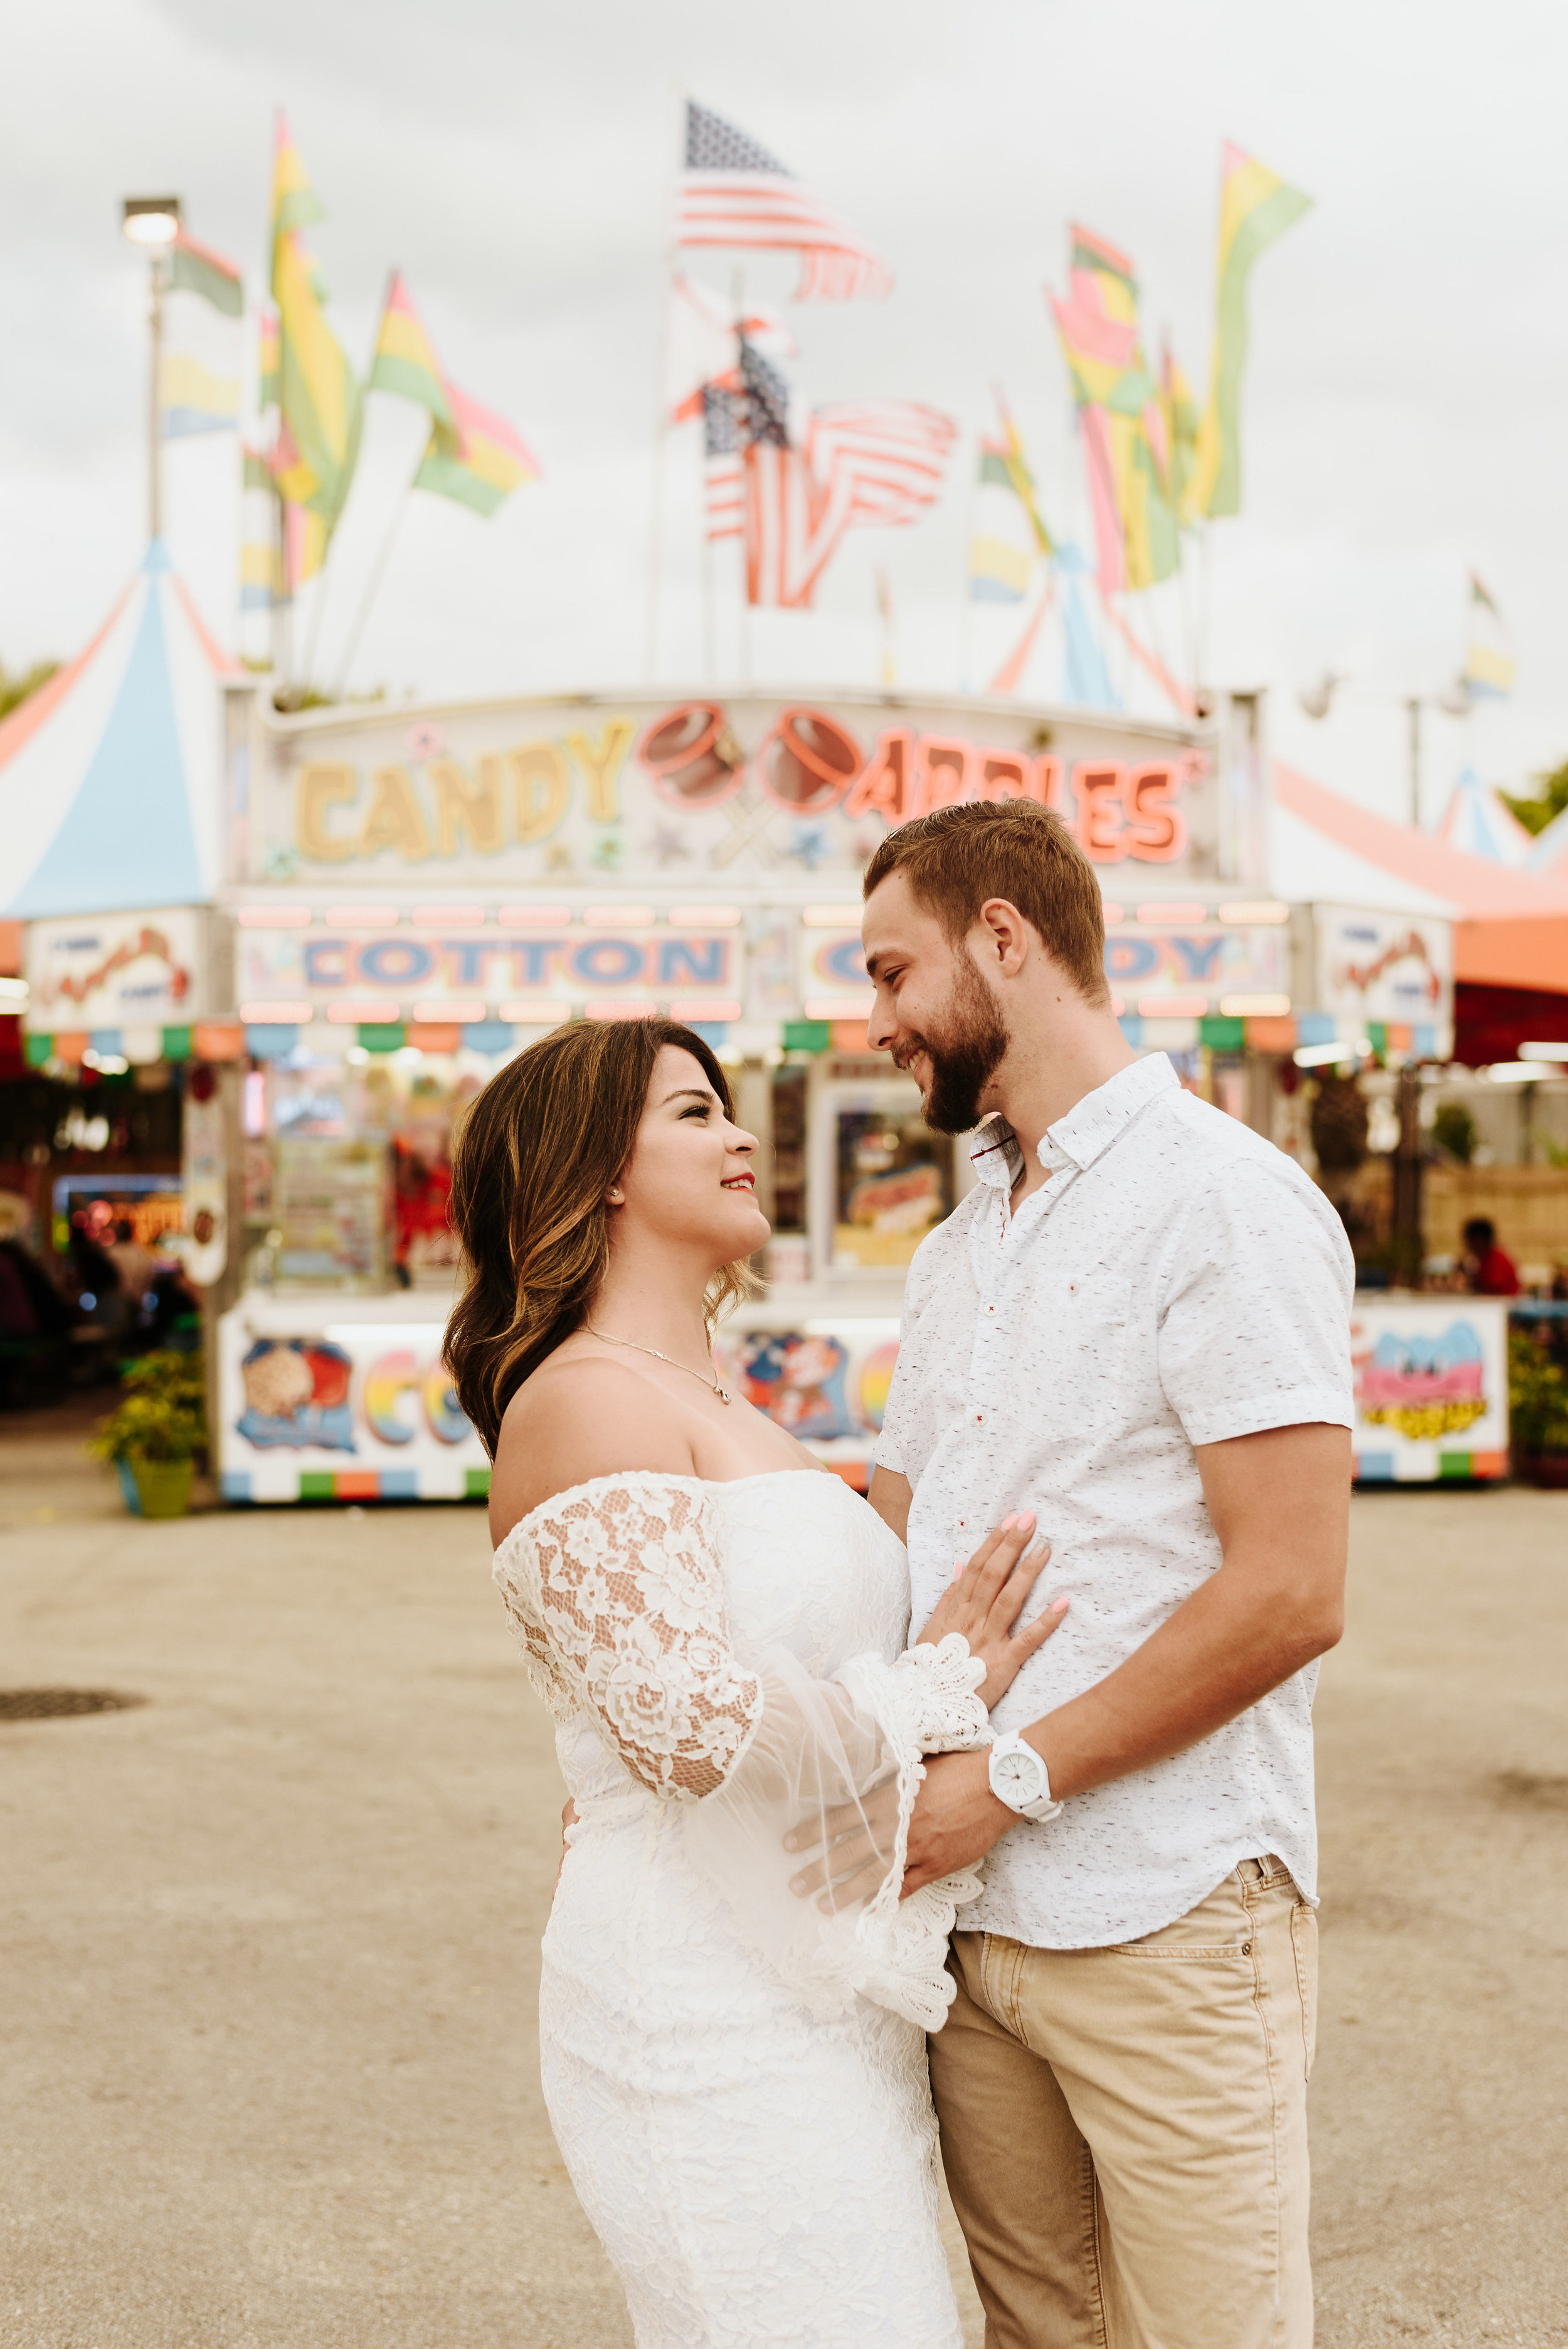 Ana_Justin_Engagement_Session_Miami_Dade_Fair_Photography_by_V_3215.jpg